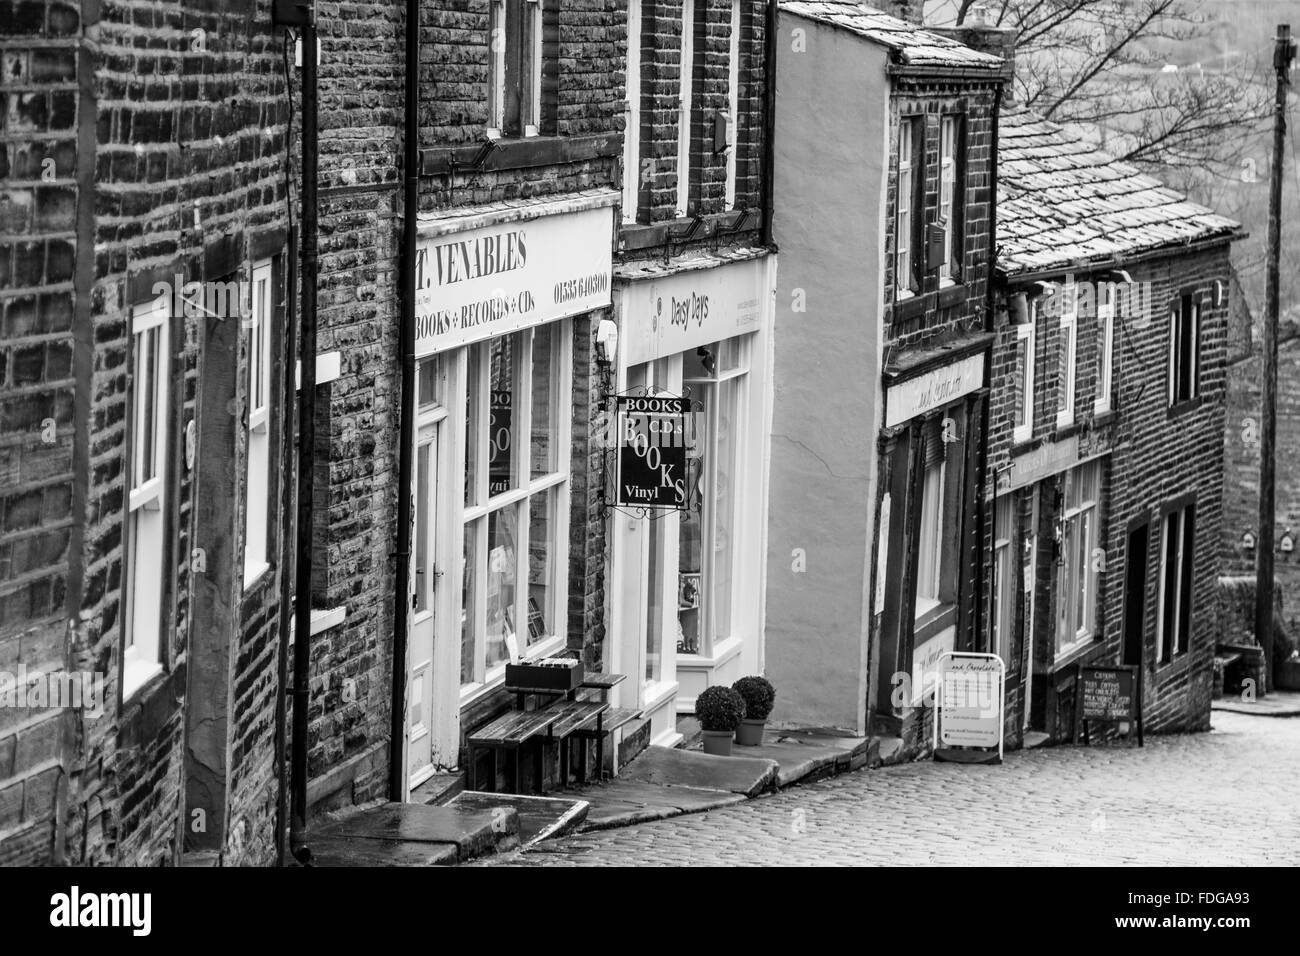 The main street in the village of Haworth, West Yorkshire, England, UK Stock Photo